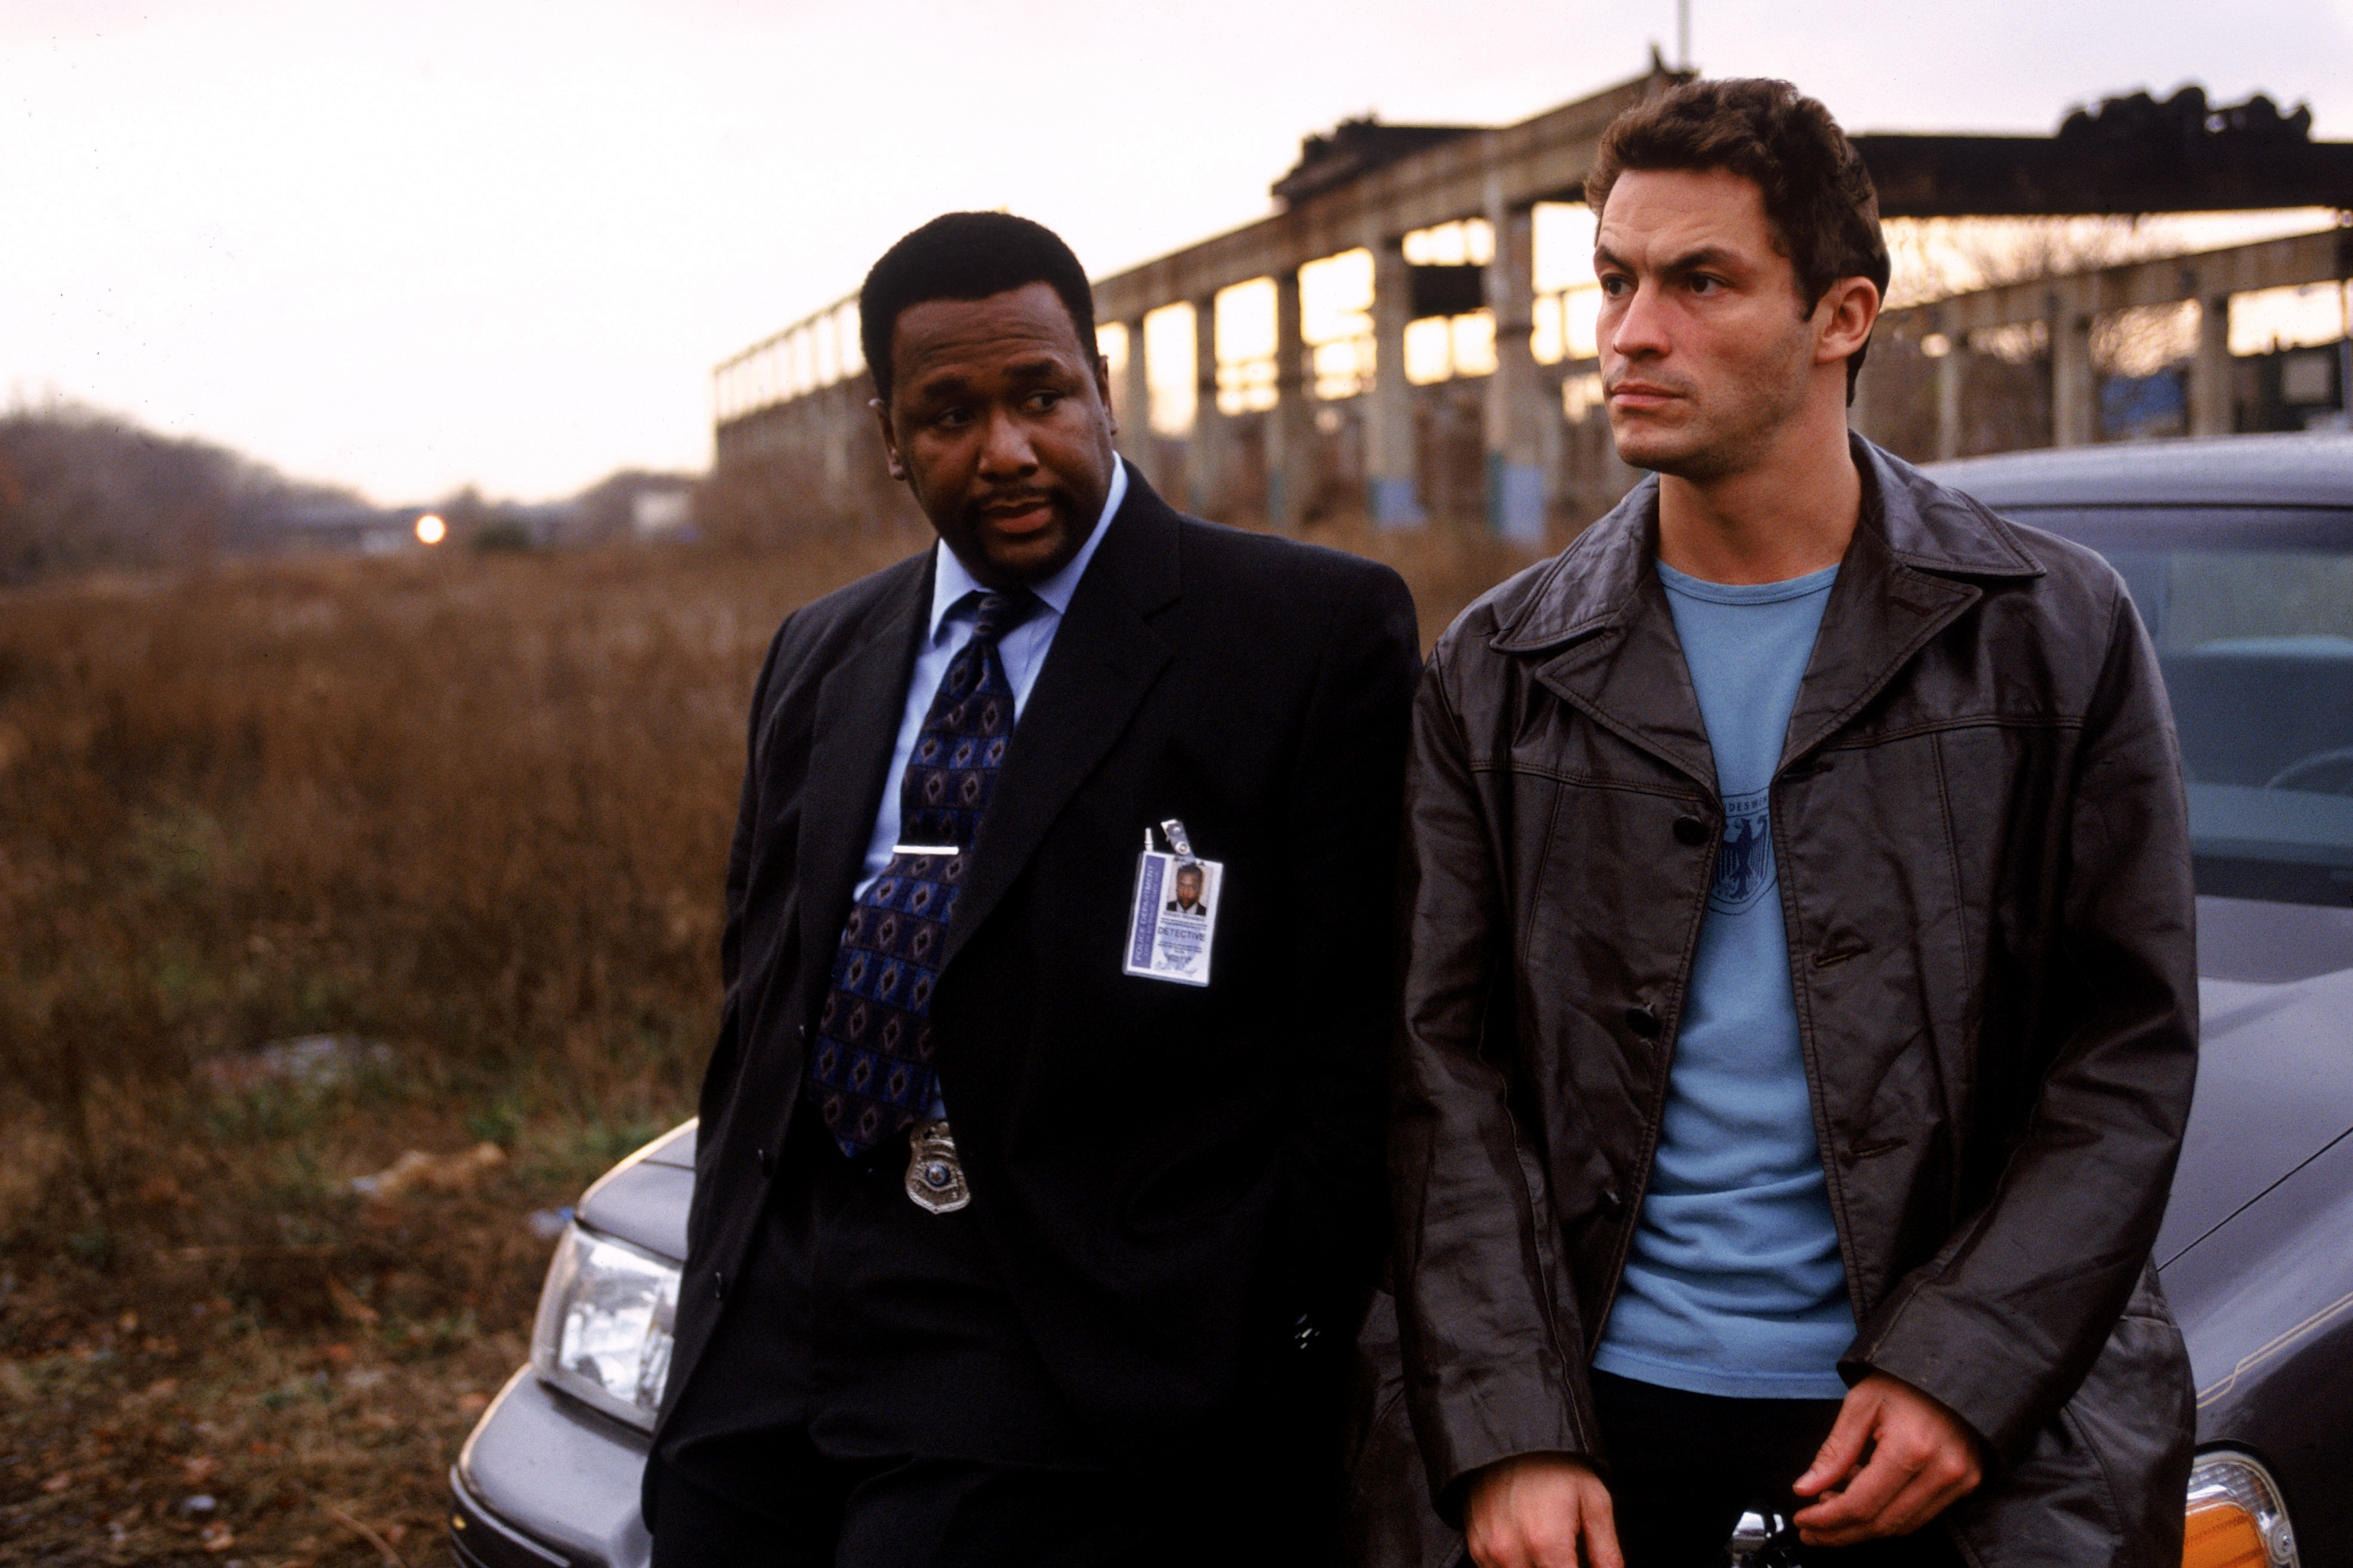 Detective Willaim 'Bunk' Moreland (Wendell Pierce) and Detective James 'Jimmy' McNulty (Dominic West) in The Wire (HBO)